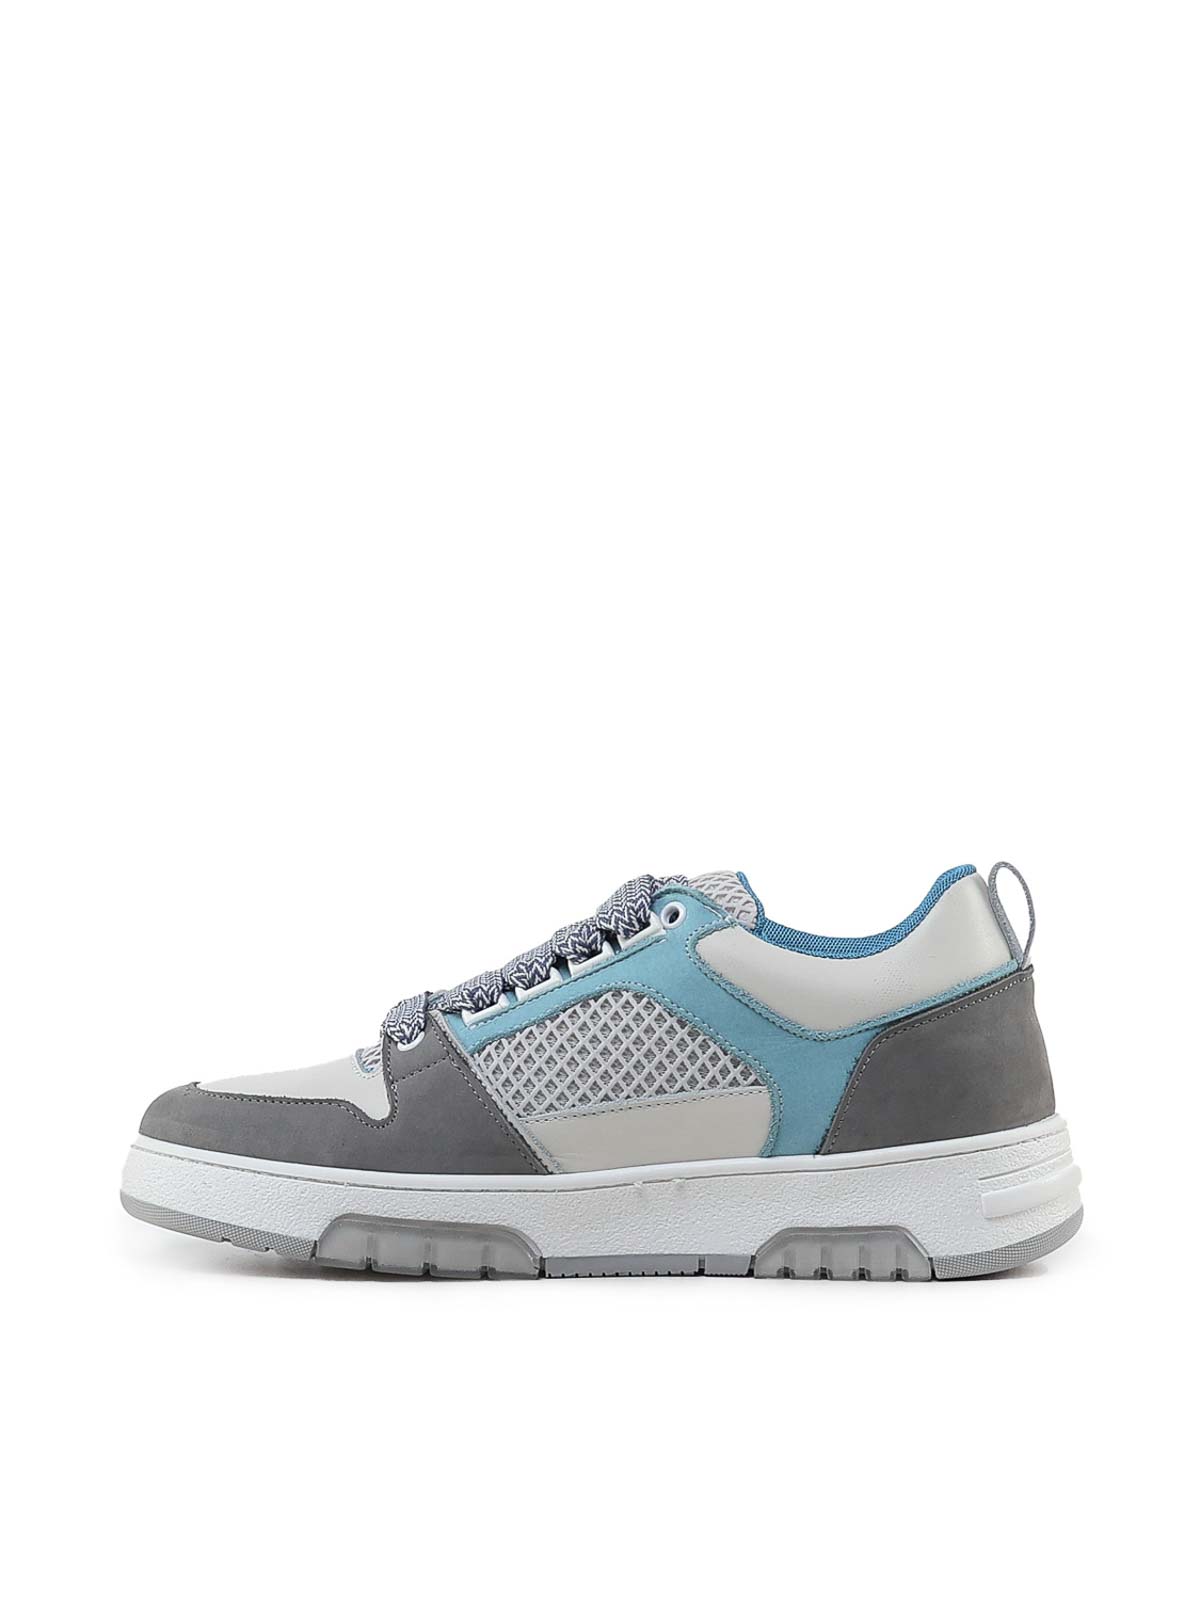 Shop Giuliano Galiano Vyper Sneakers In Mesh And Suede In Blanco